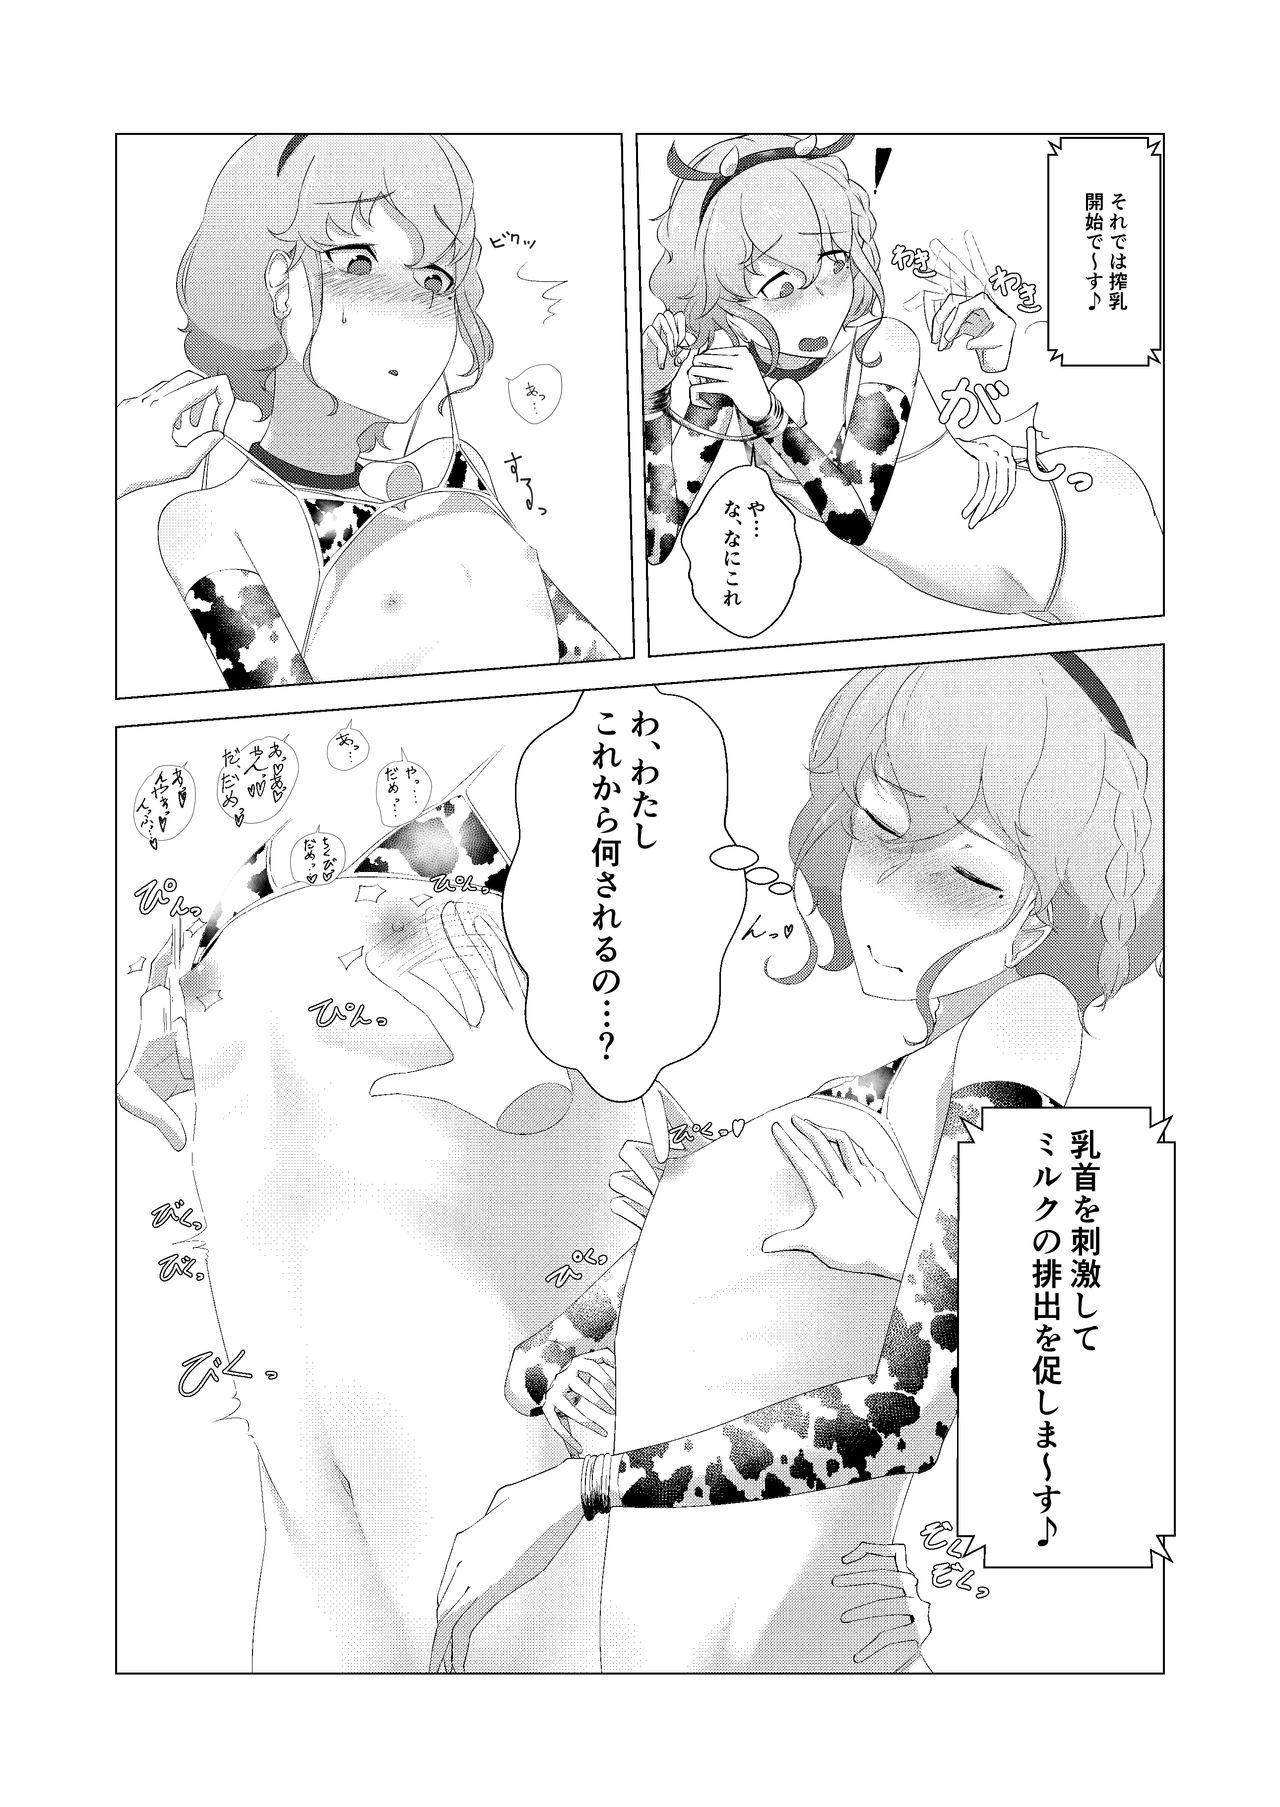 Family Sex レオナ君の牛柄ビキニエロ漫画 - Pripara Fit - Page 2